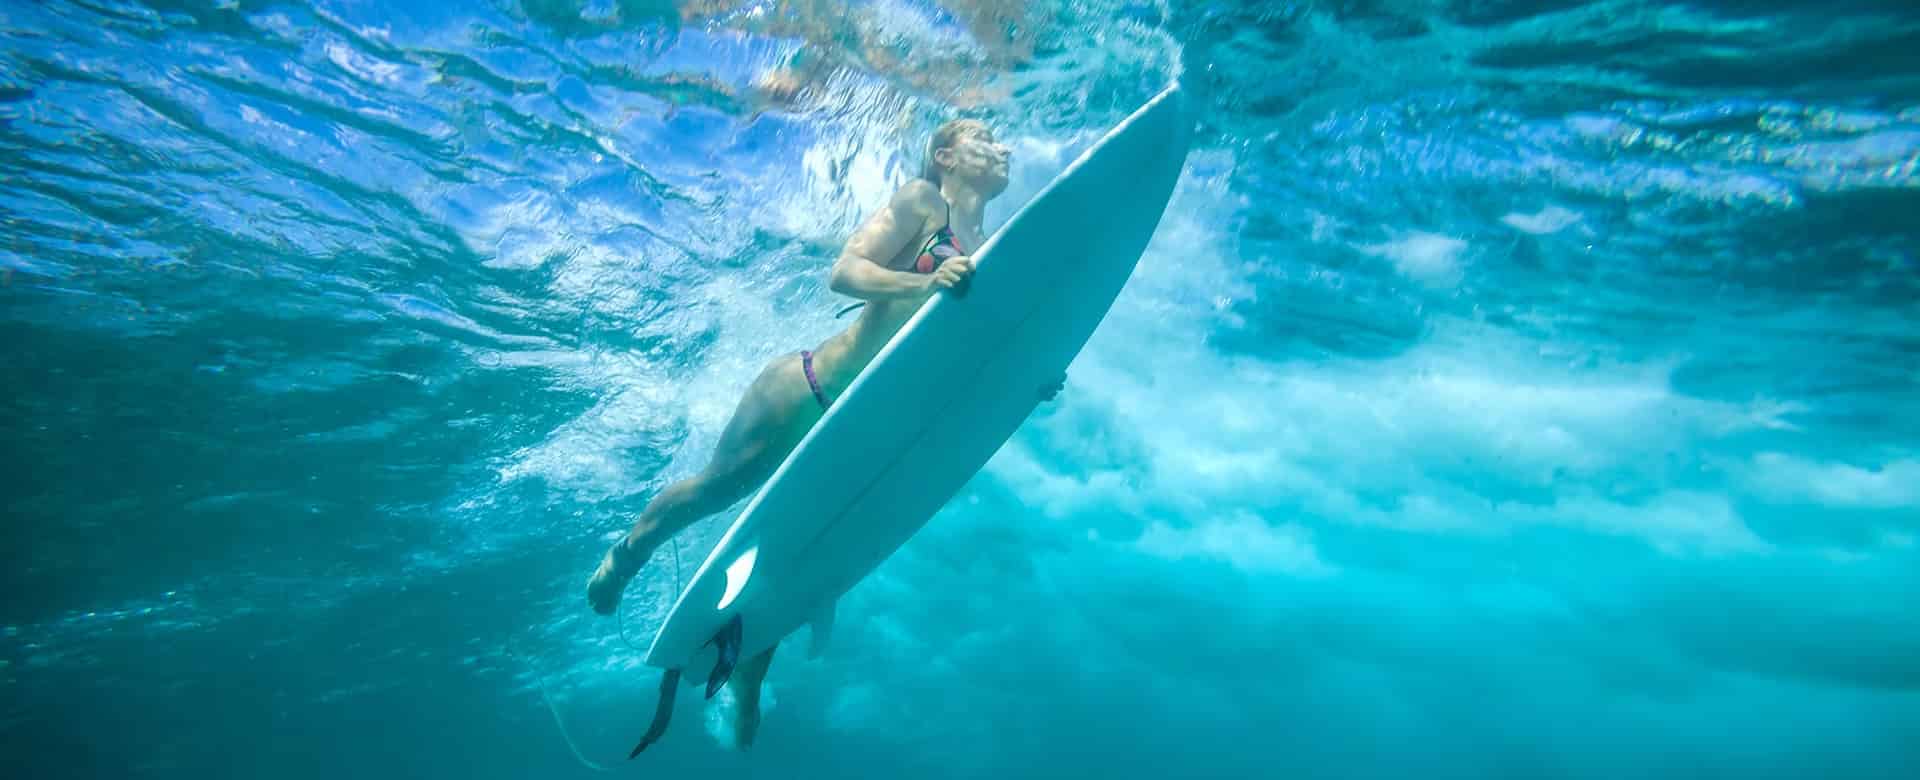 What are the negative effects of surfing?